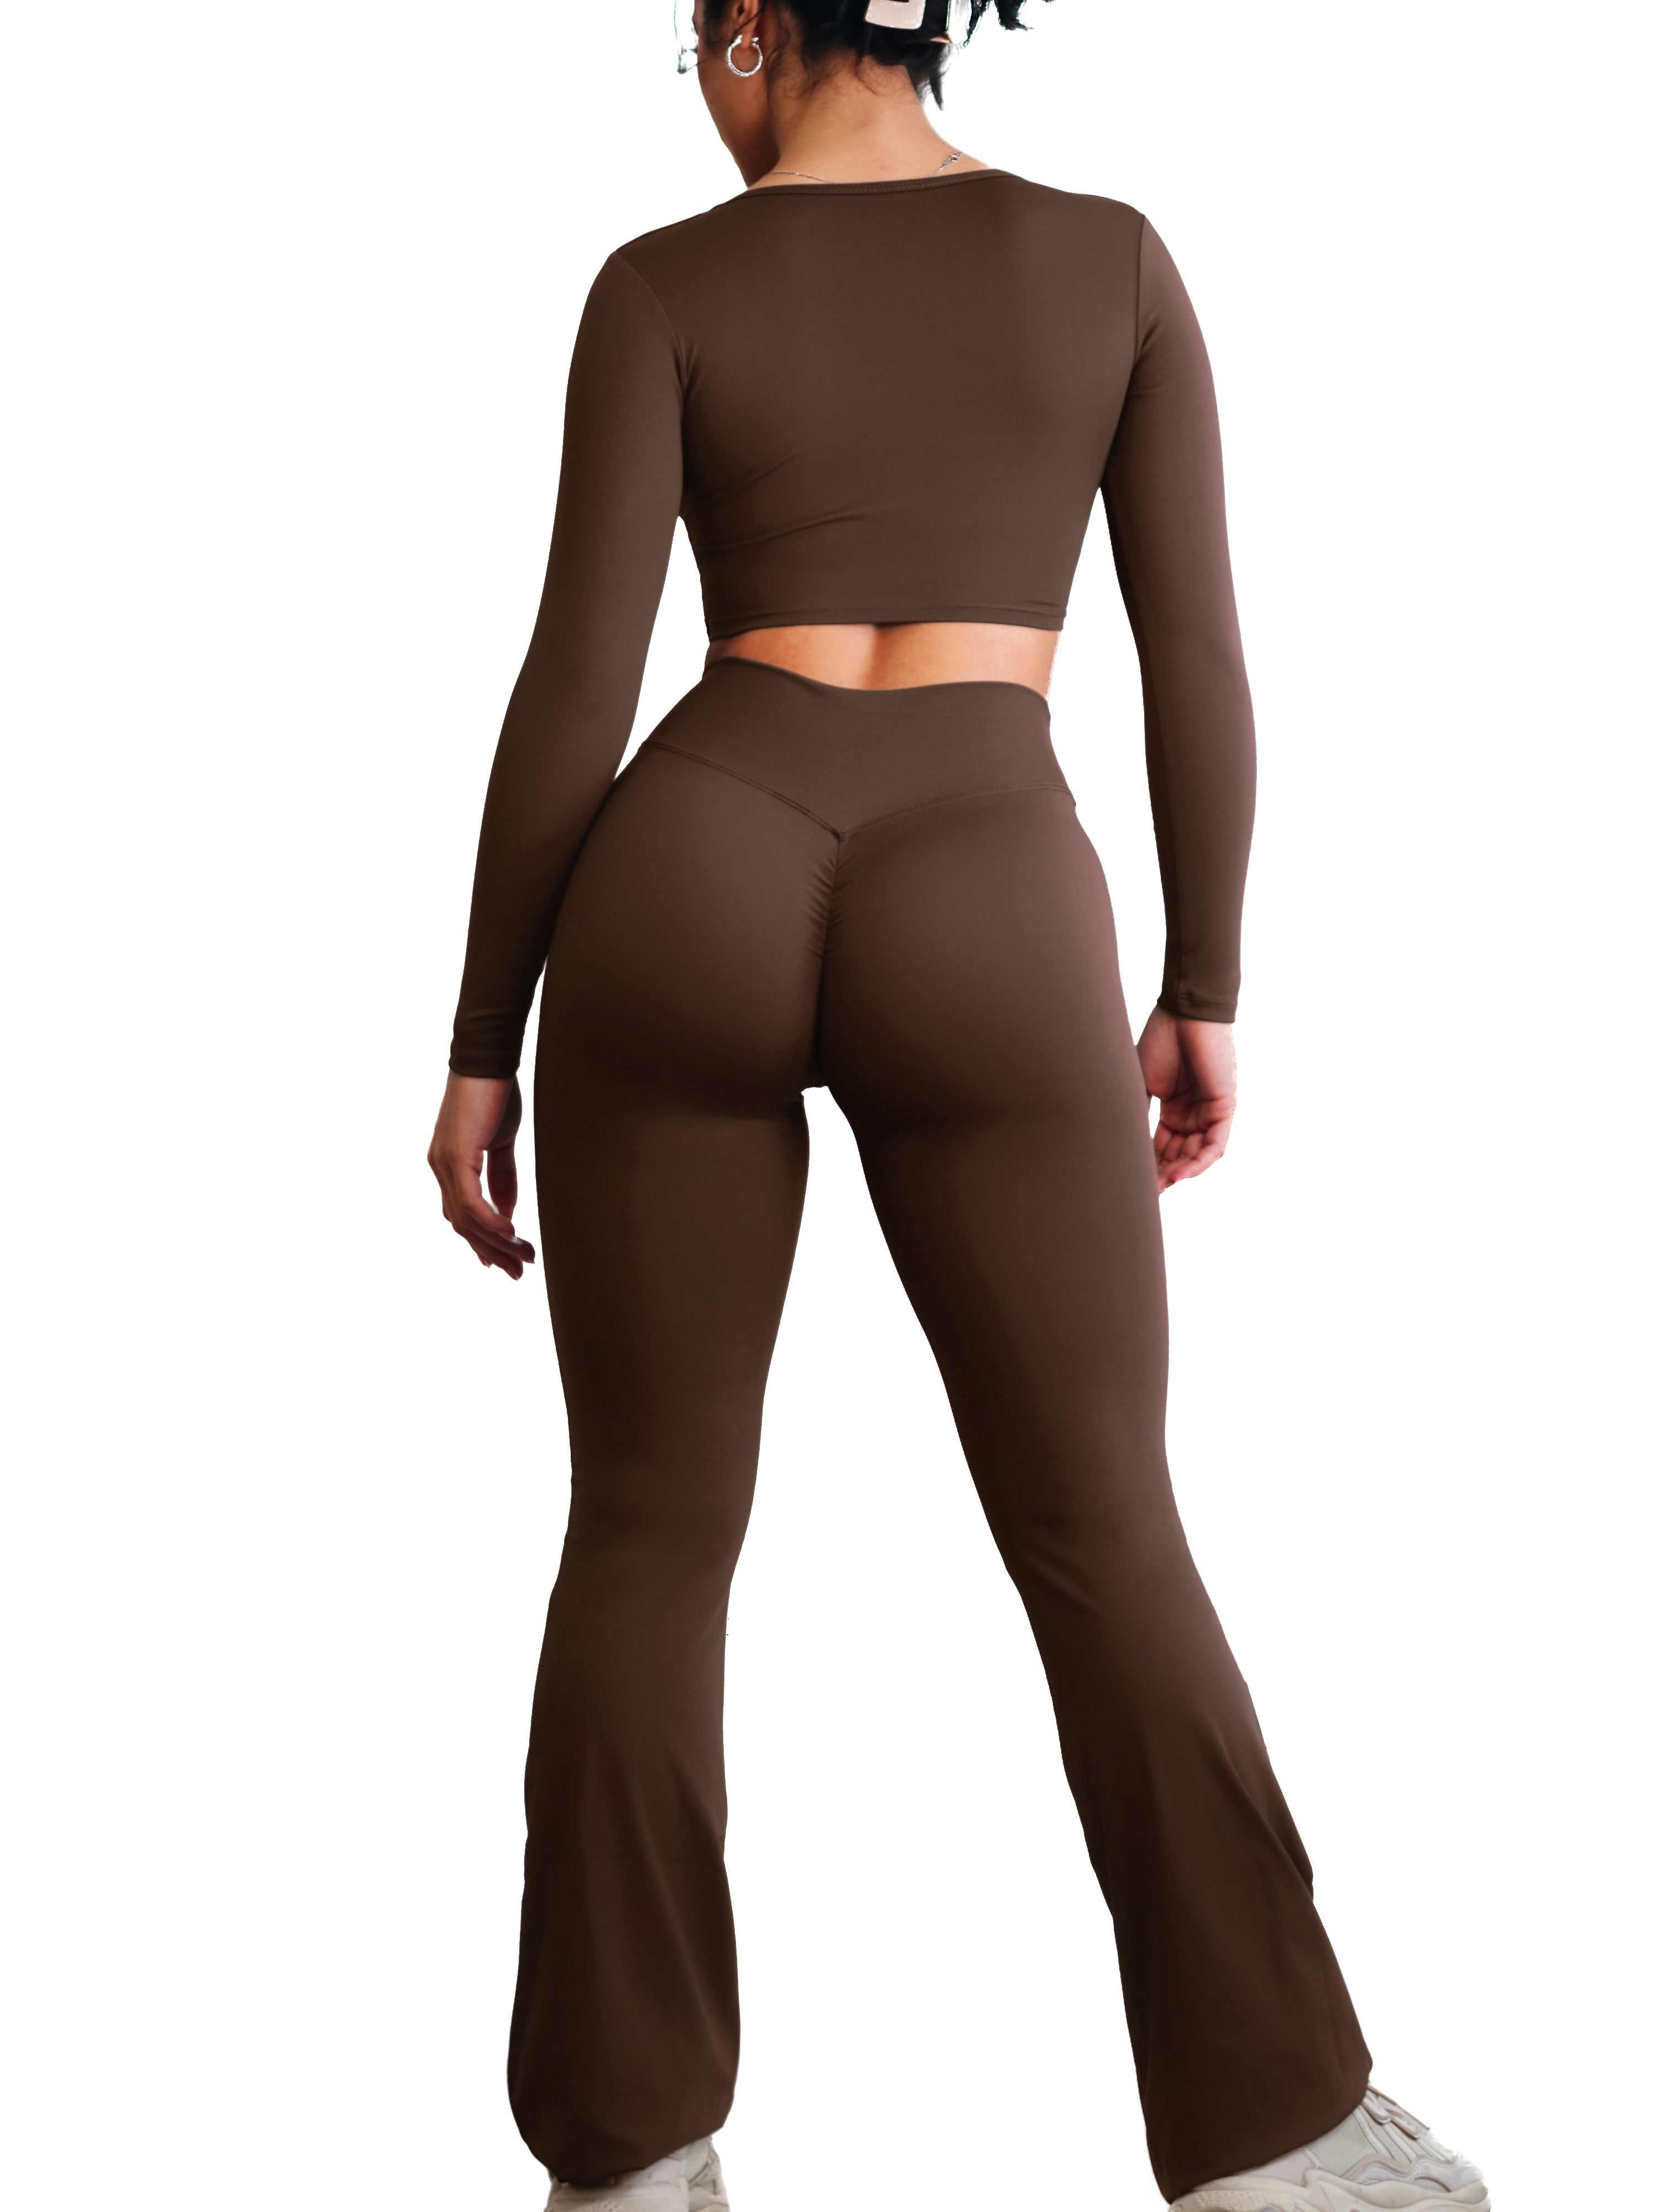 Ignition Seamless Leggings | Brown Stone - S / KISS TONGUE